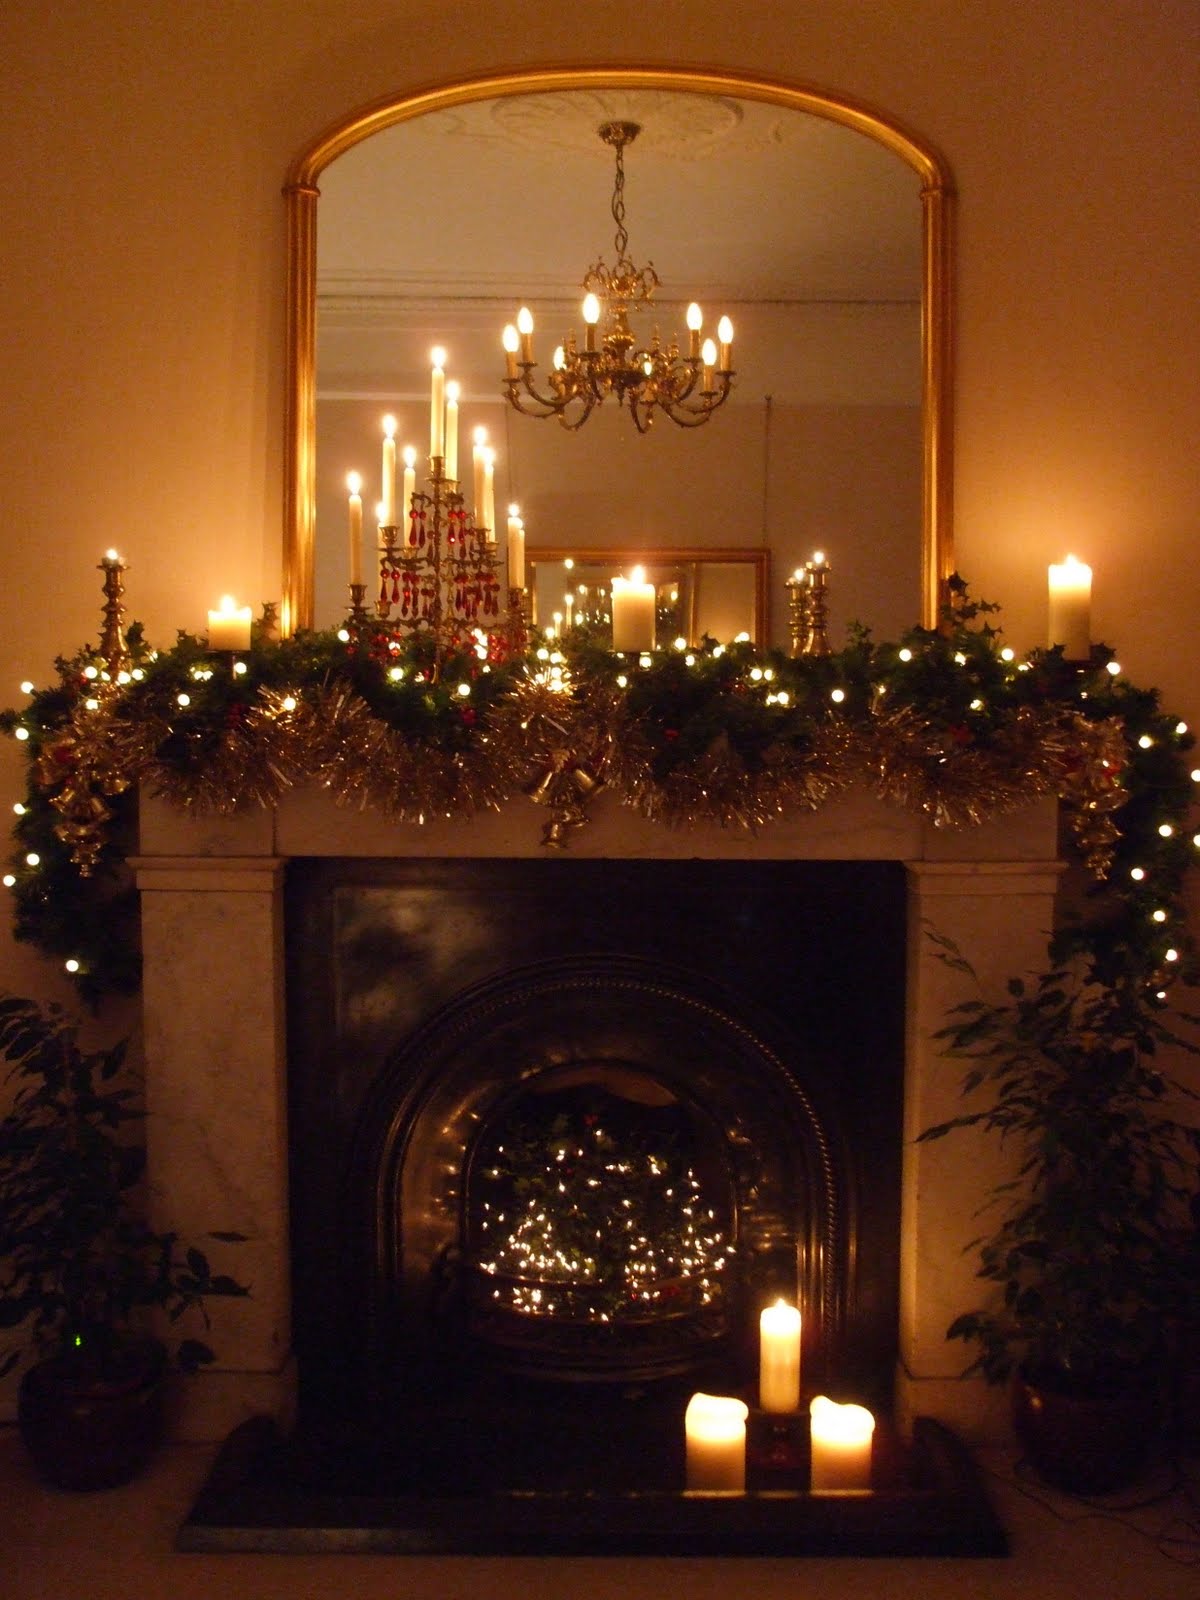 A beautifully decorated fireplace